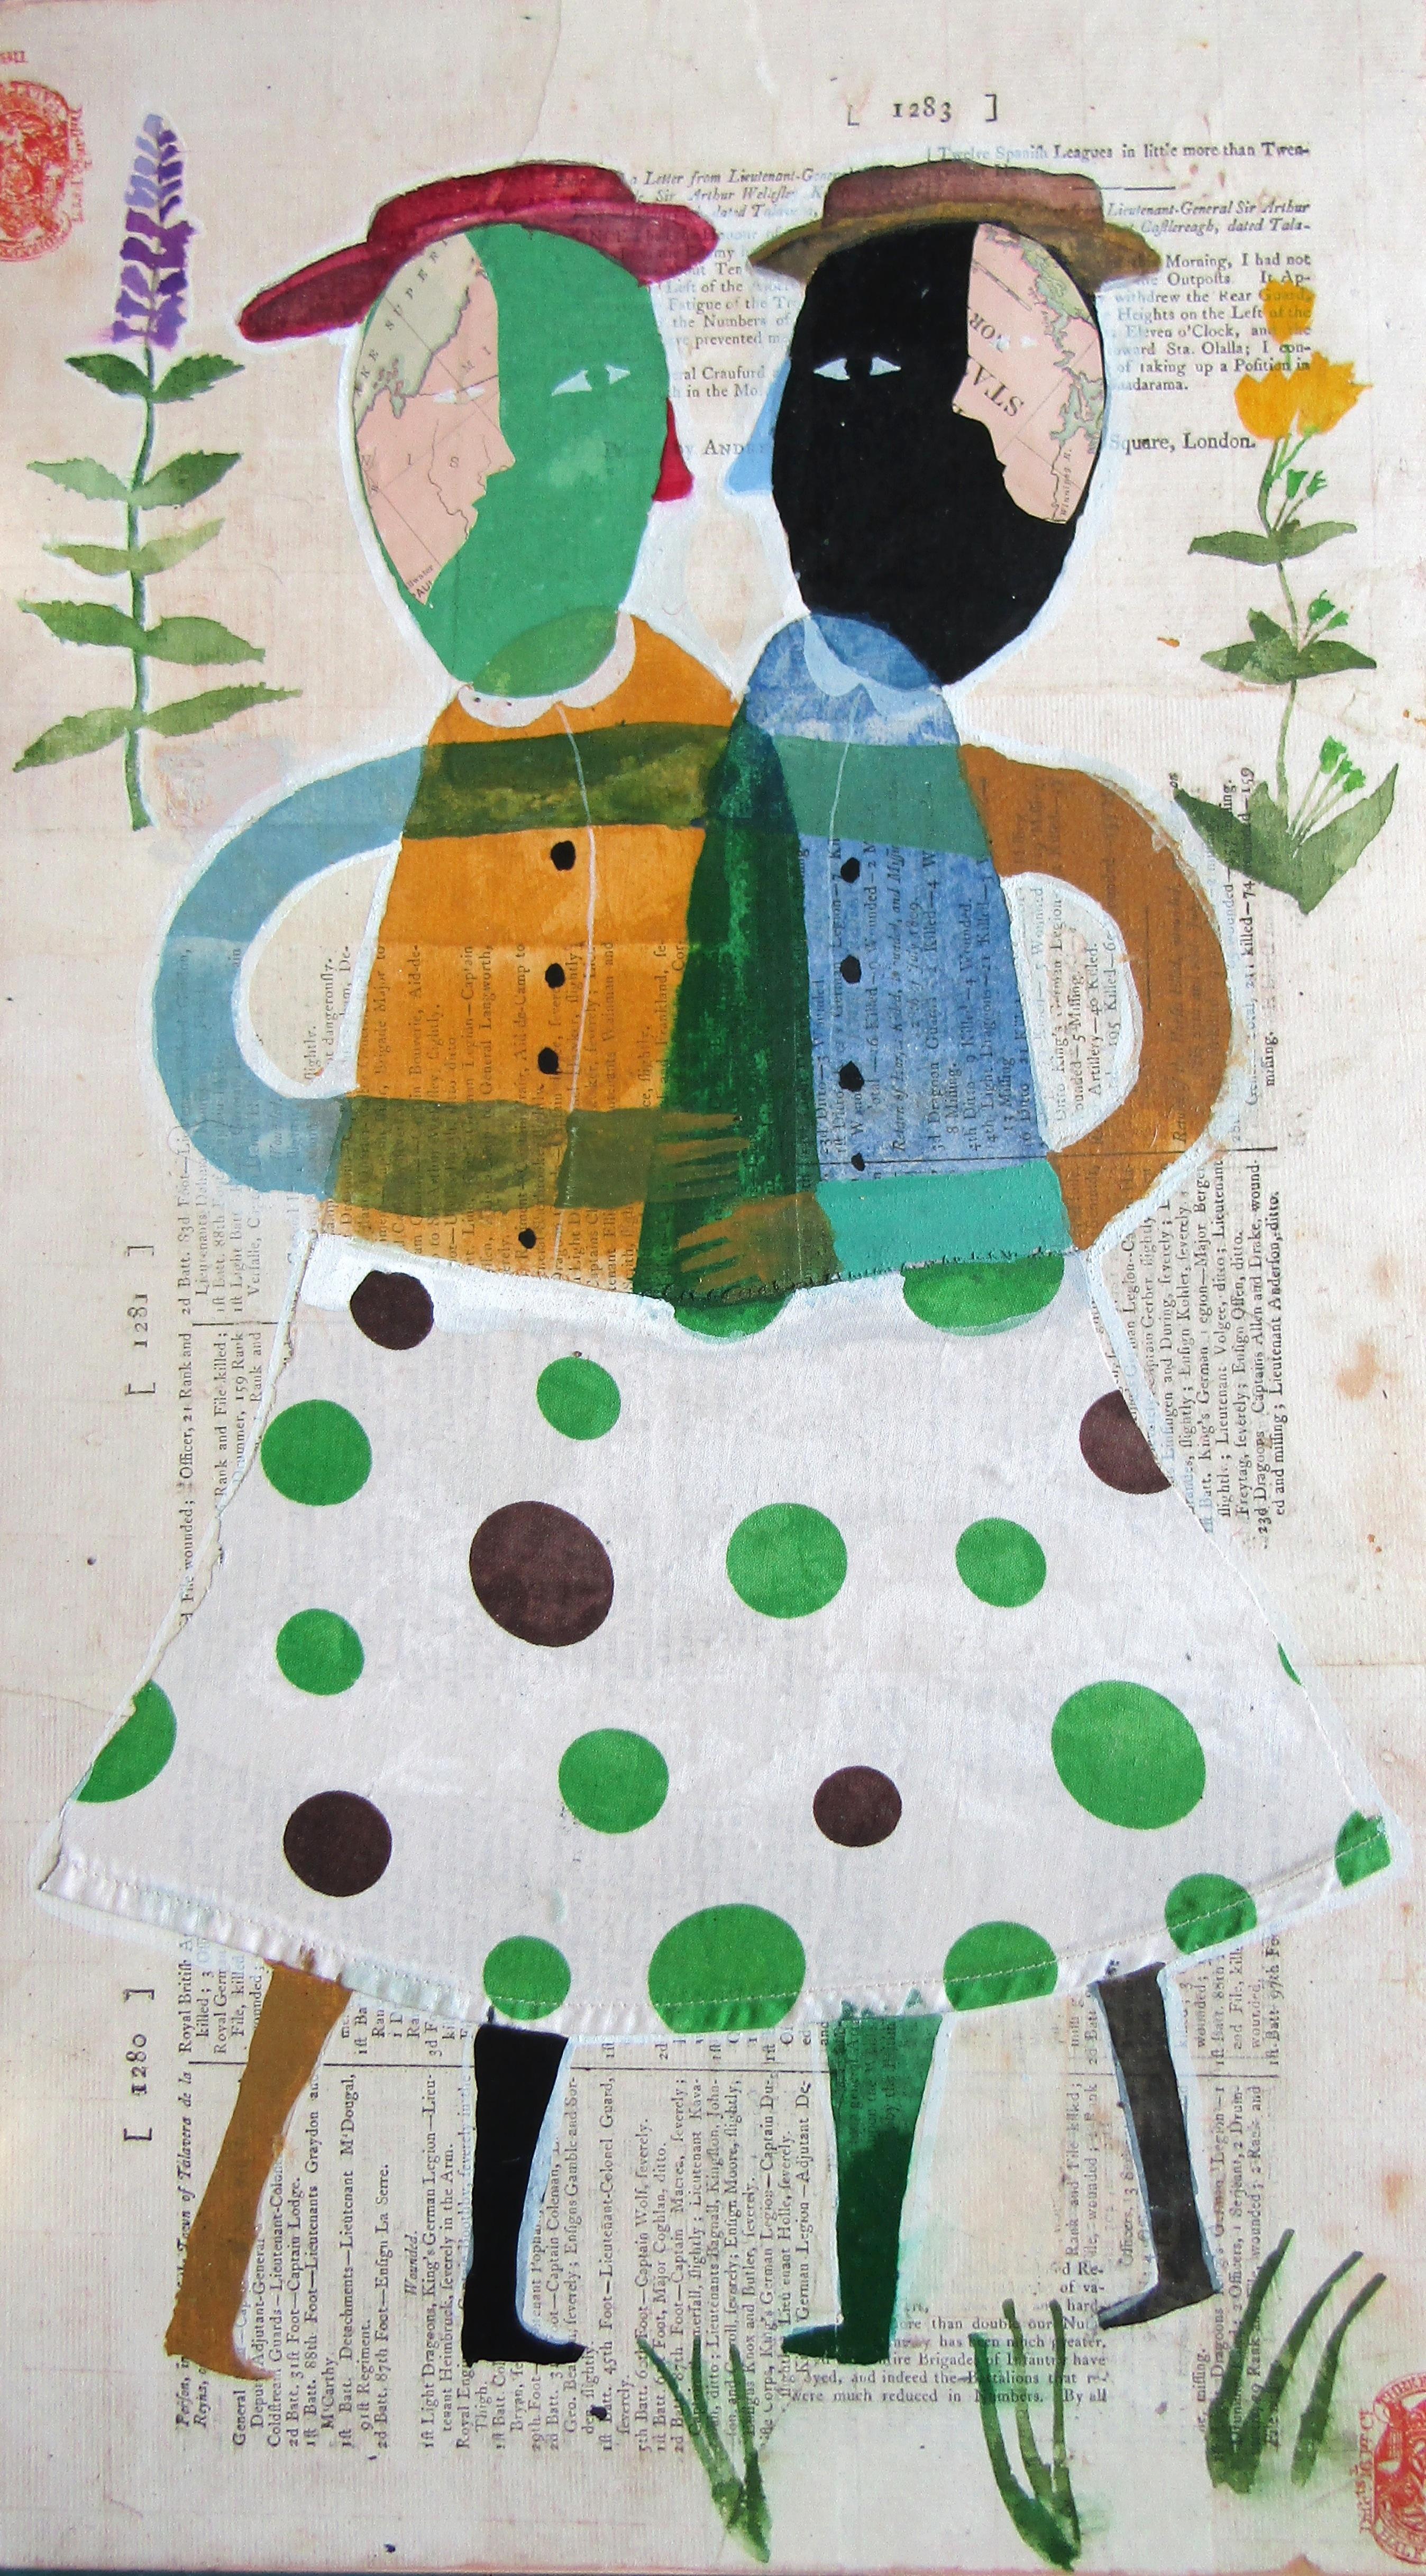 Two People in a Polka Dot Dress - Mixed Media Art by Donald Saaf